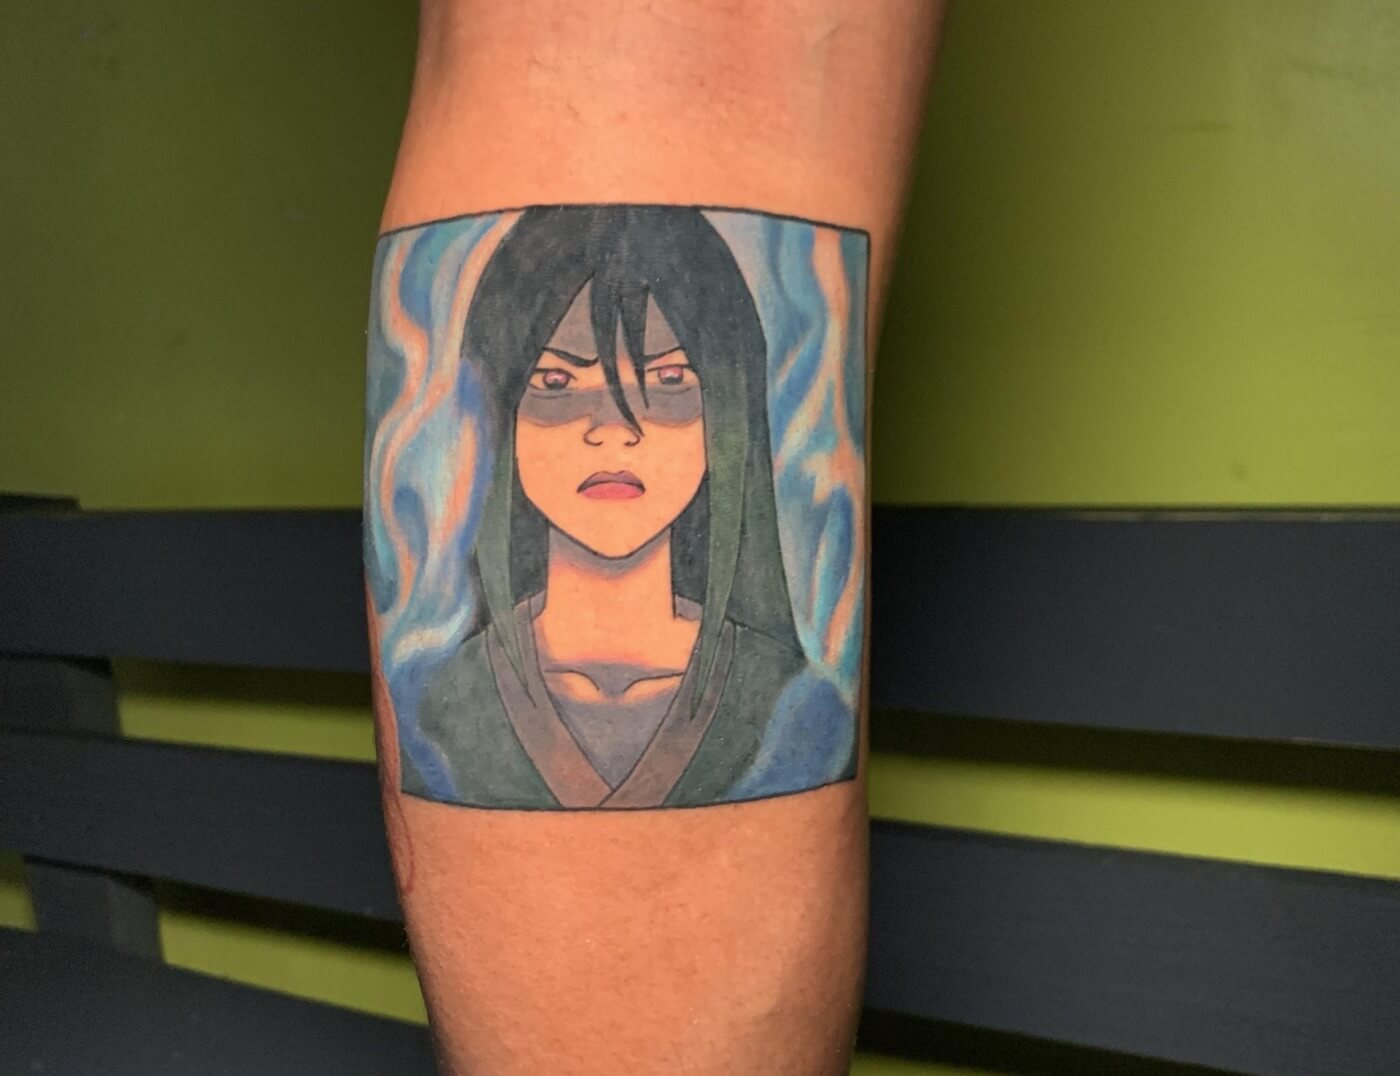 Azula with blue fire Anime Portrait tattoo by J.R. Outlaw of Iron Palm Tattoos & Body Piercing. Inspired by the world of 'Avatar' from "The Last Airbender.' Call 404-973-7828 or stop by for a free consultation. Walk-Ins welcome